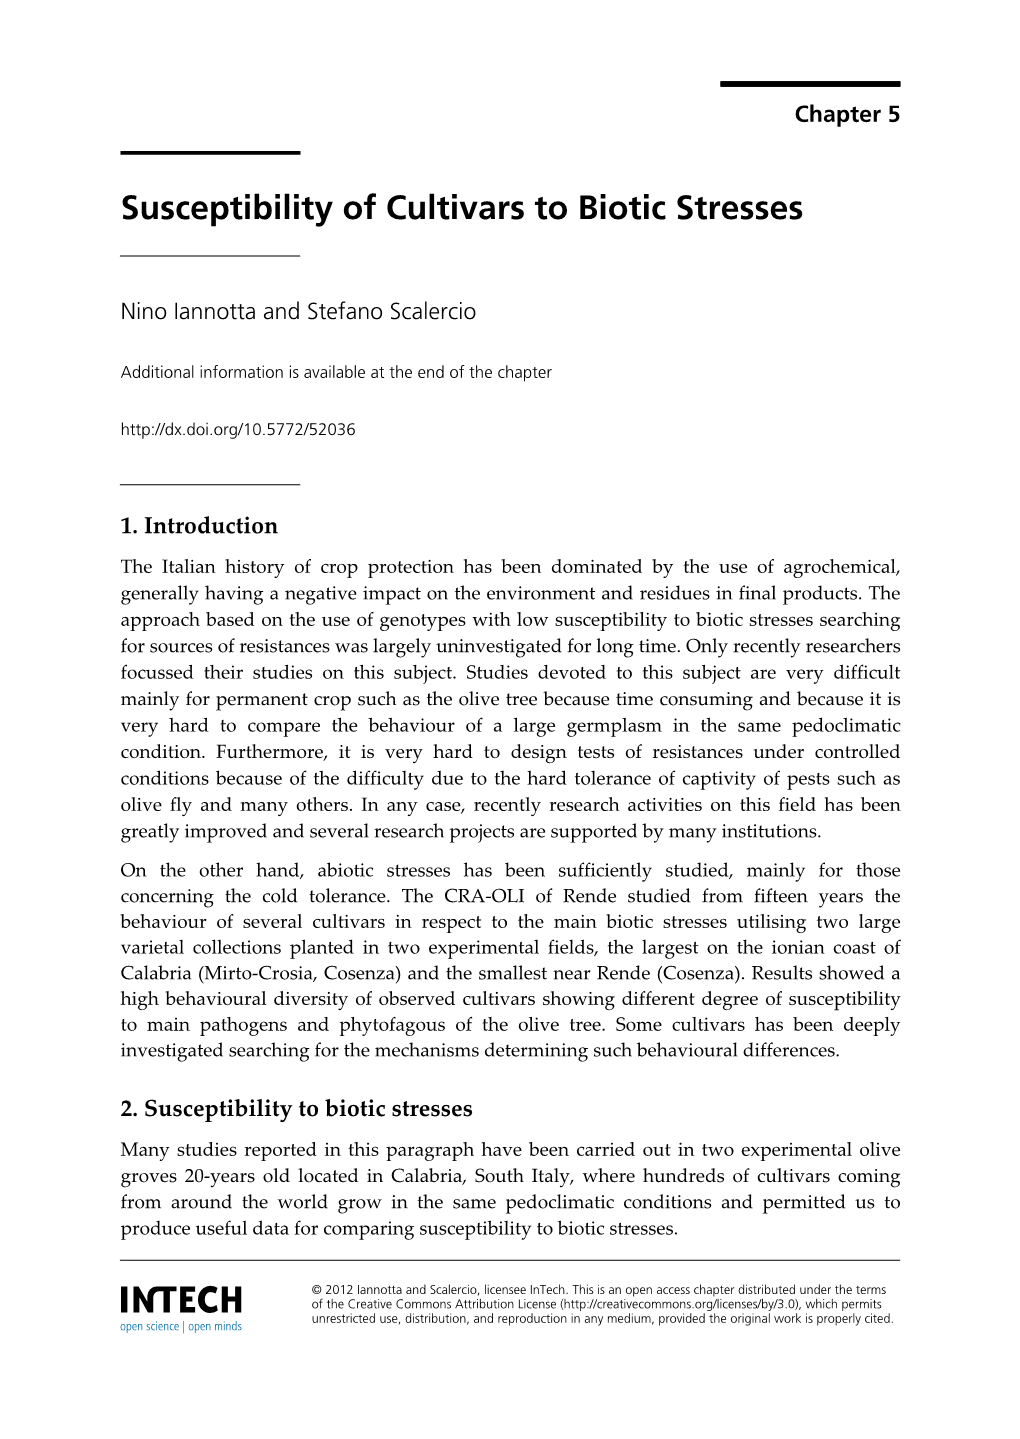 Susceptibility of Cultivars to Biotic Stresses